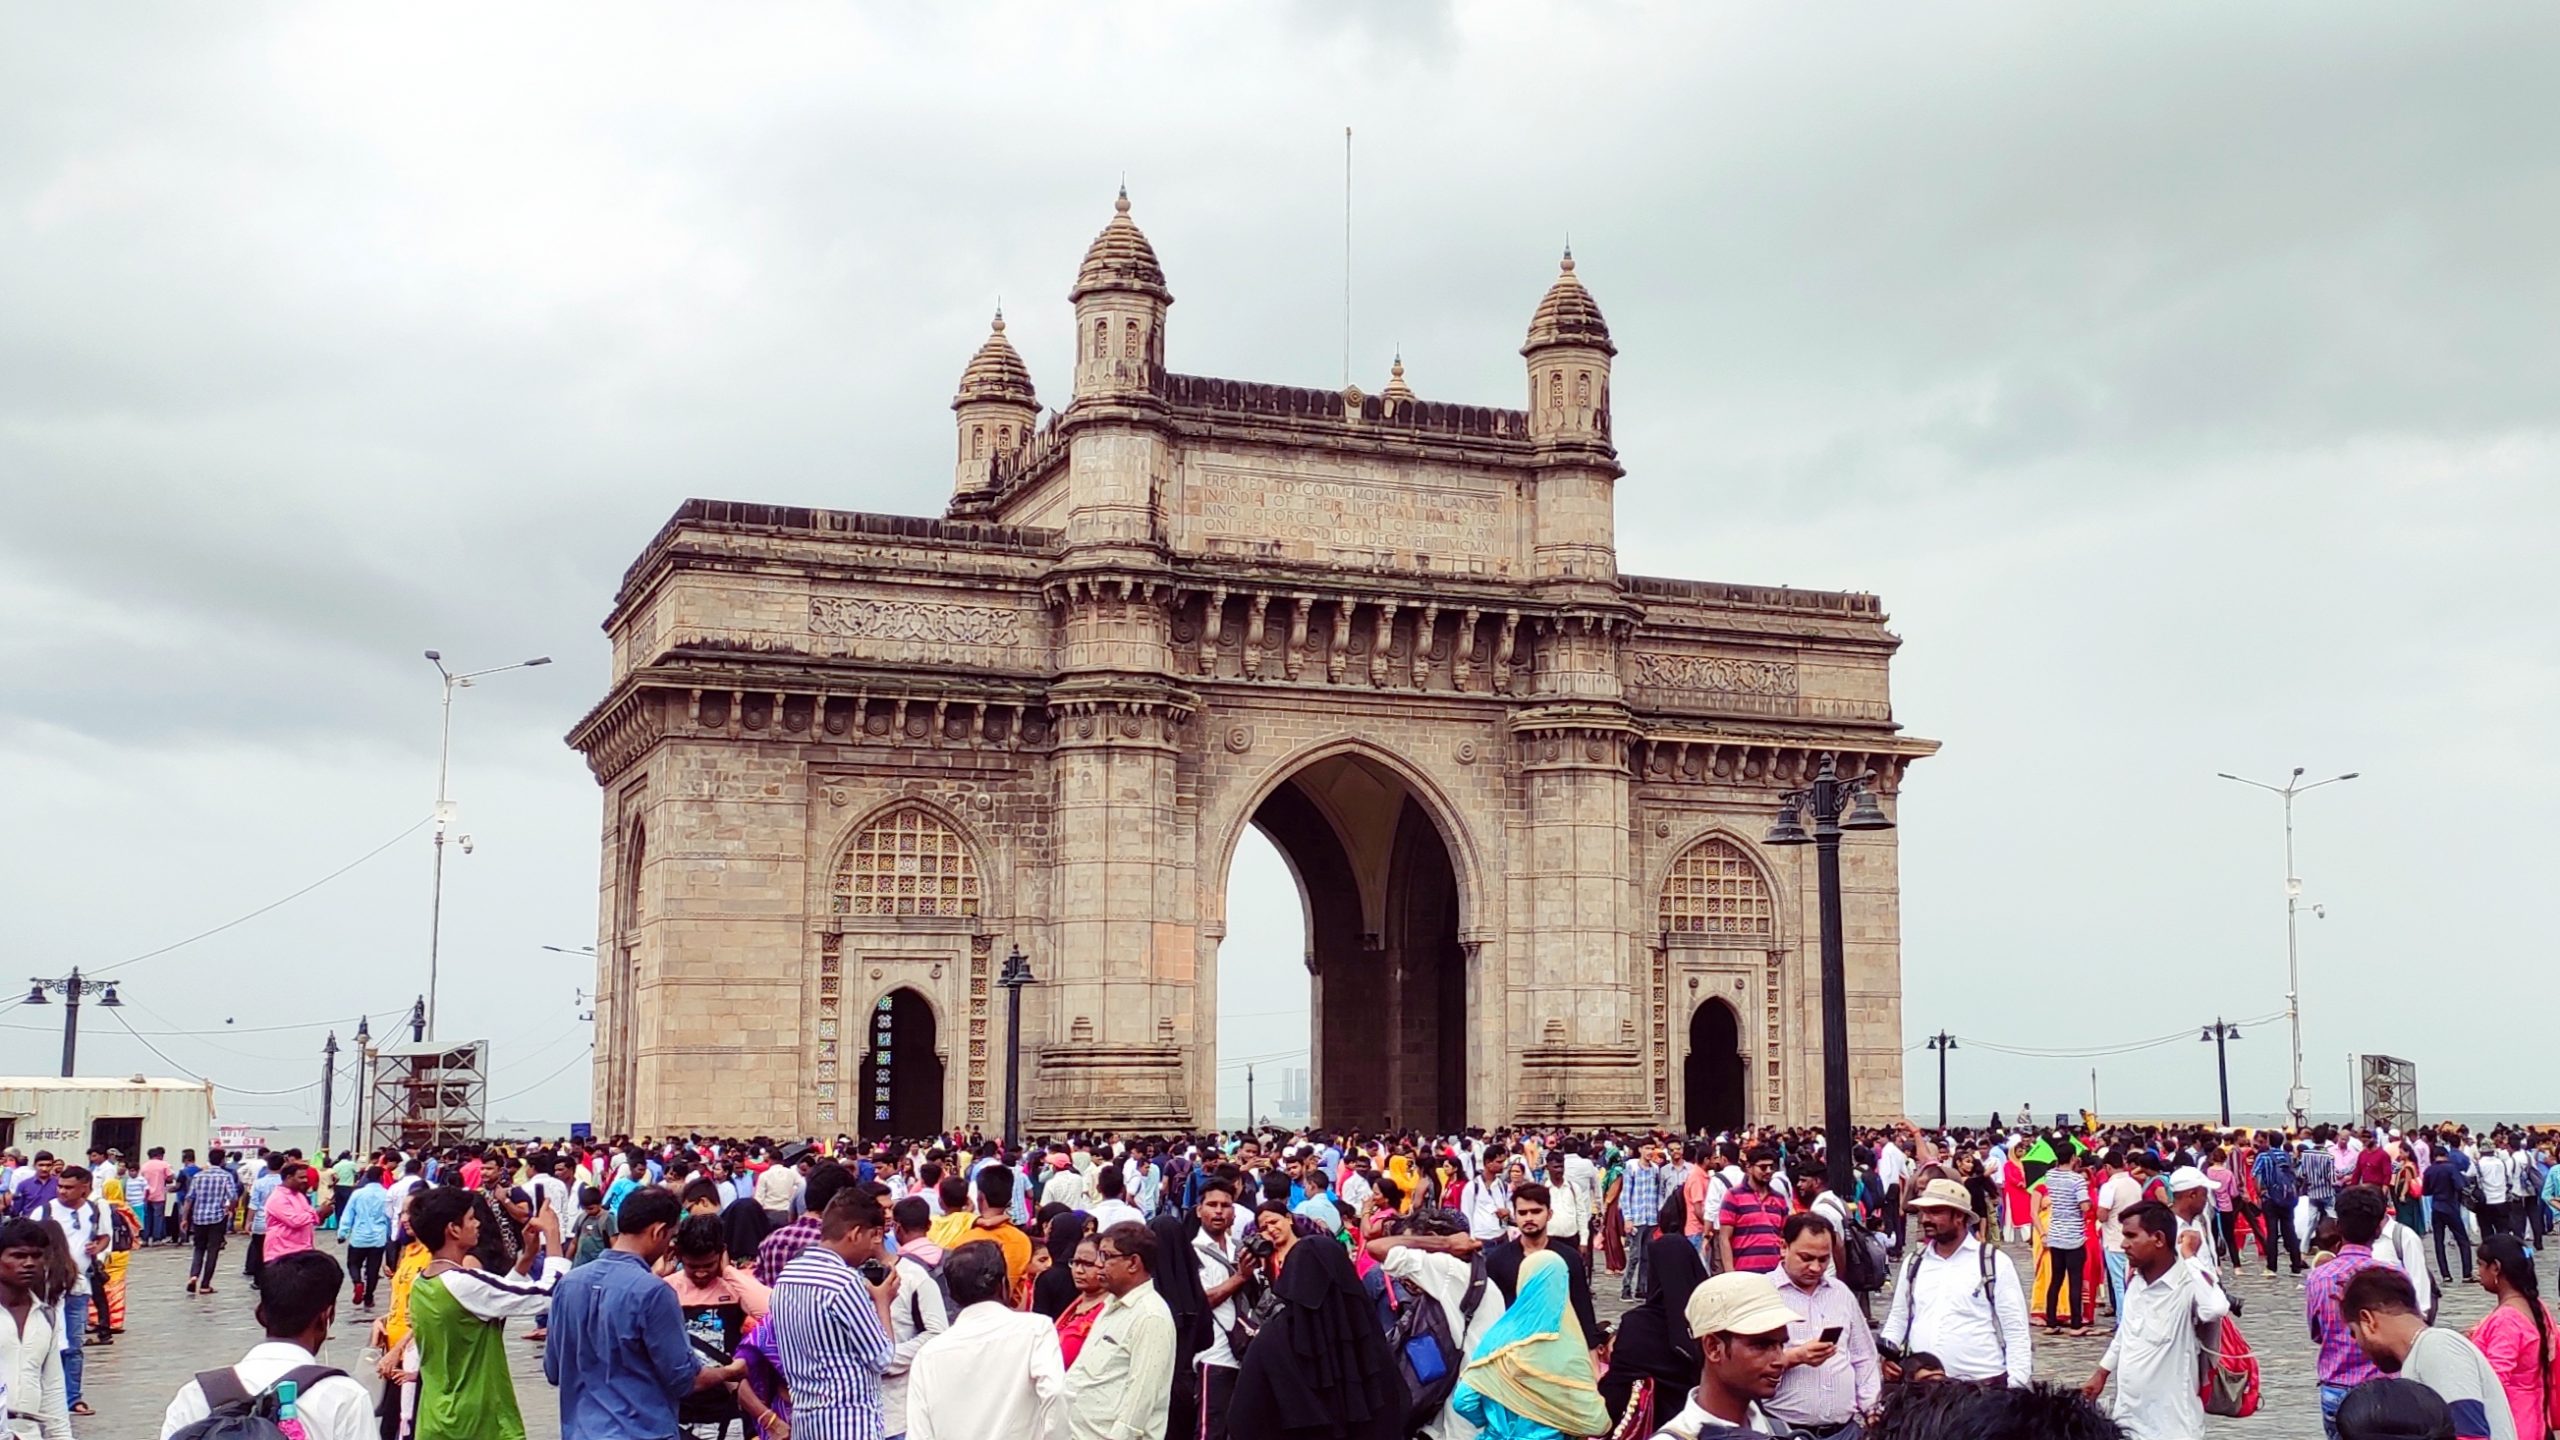 Crowd at gateway of India